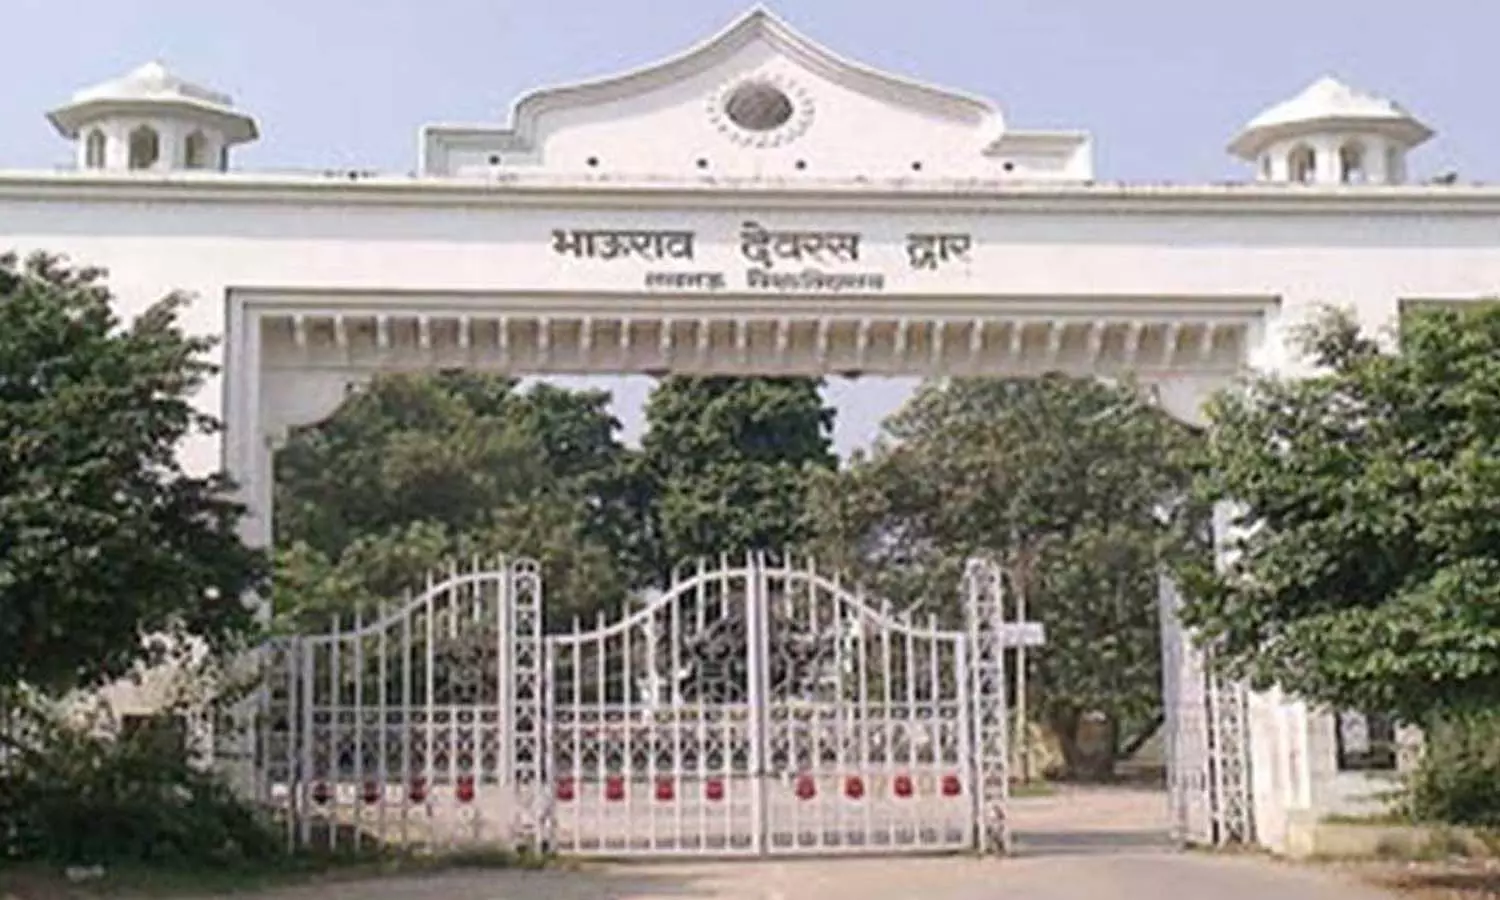 4 new auditoriums will be built in Lucknow University, a new pharmacy building will be built with Rs 25 crore